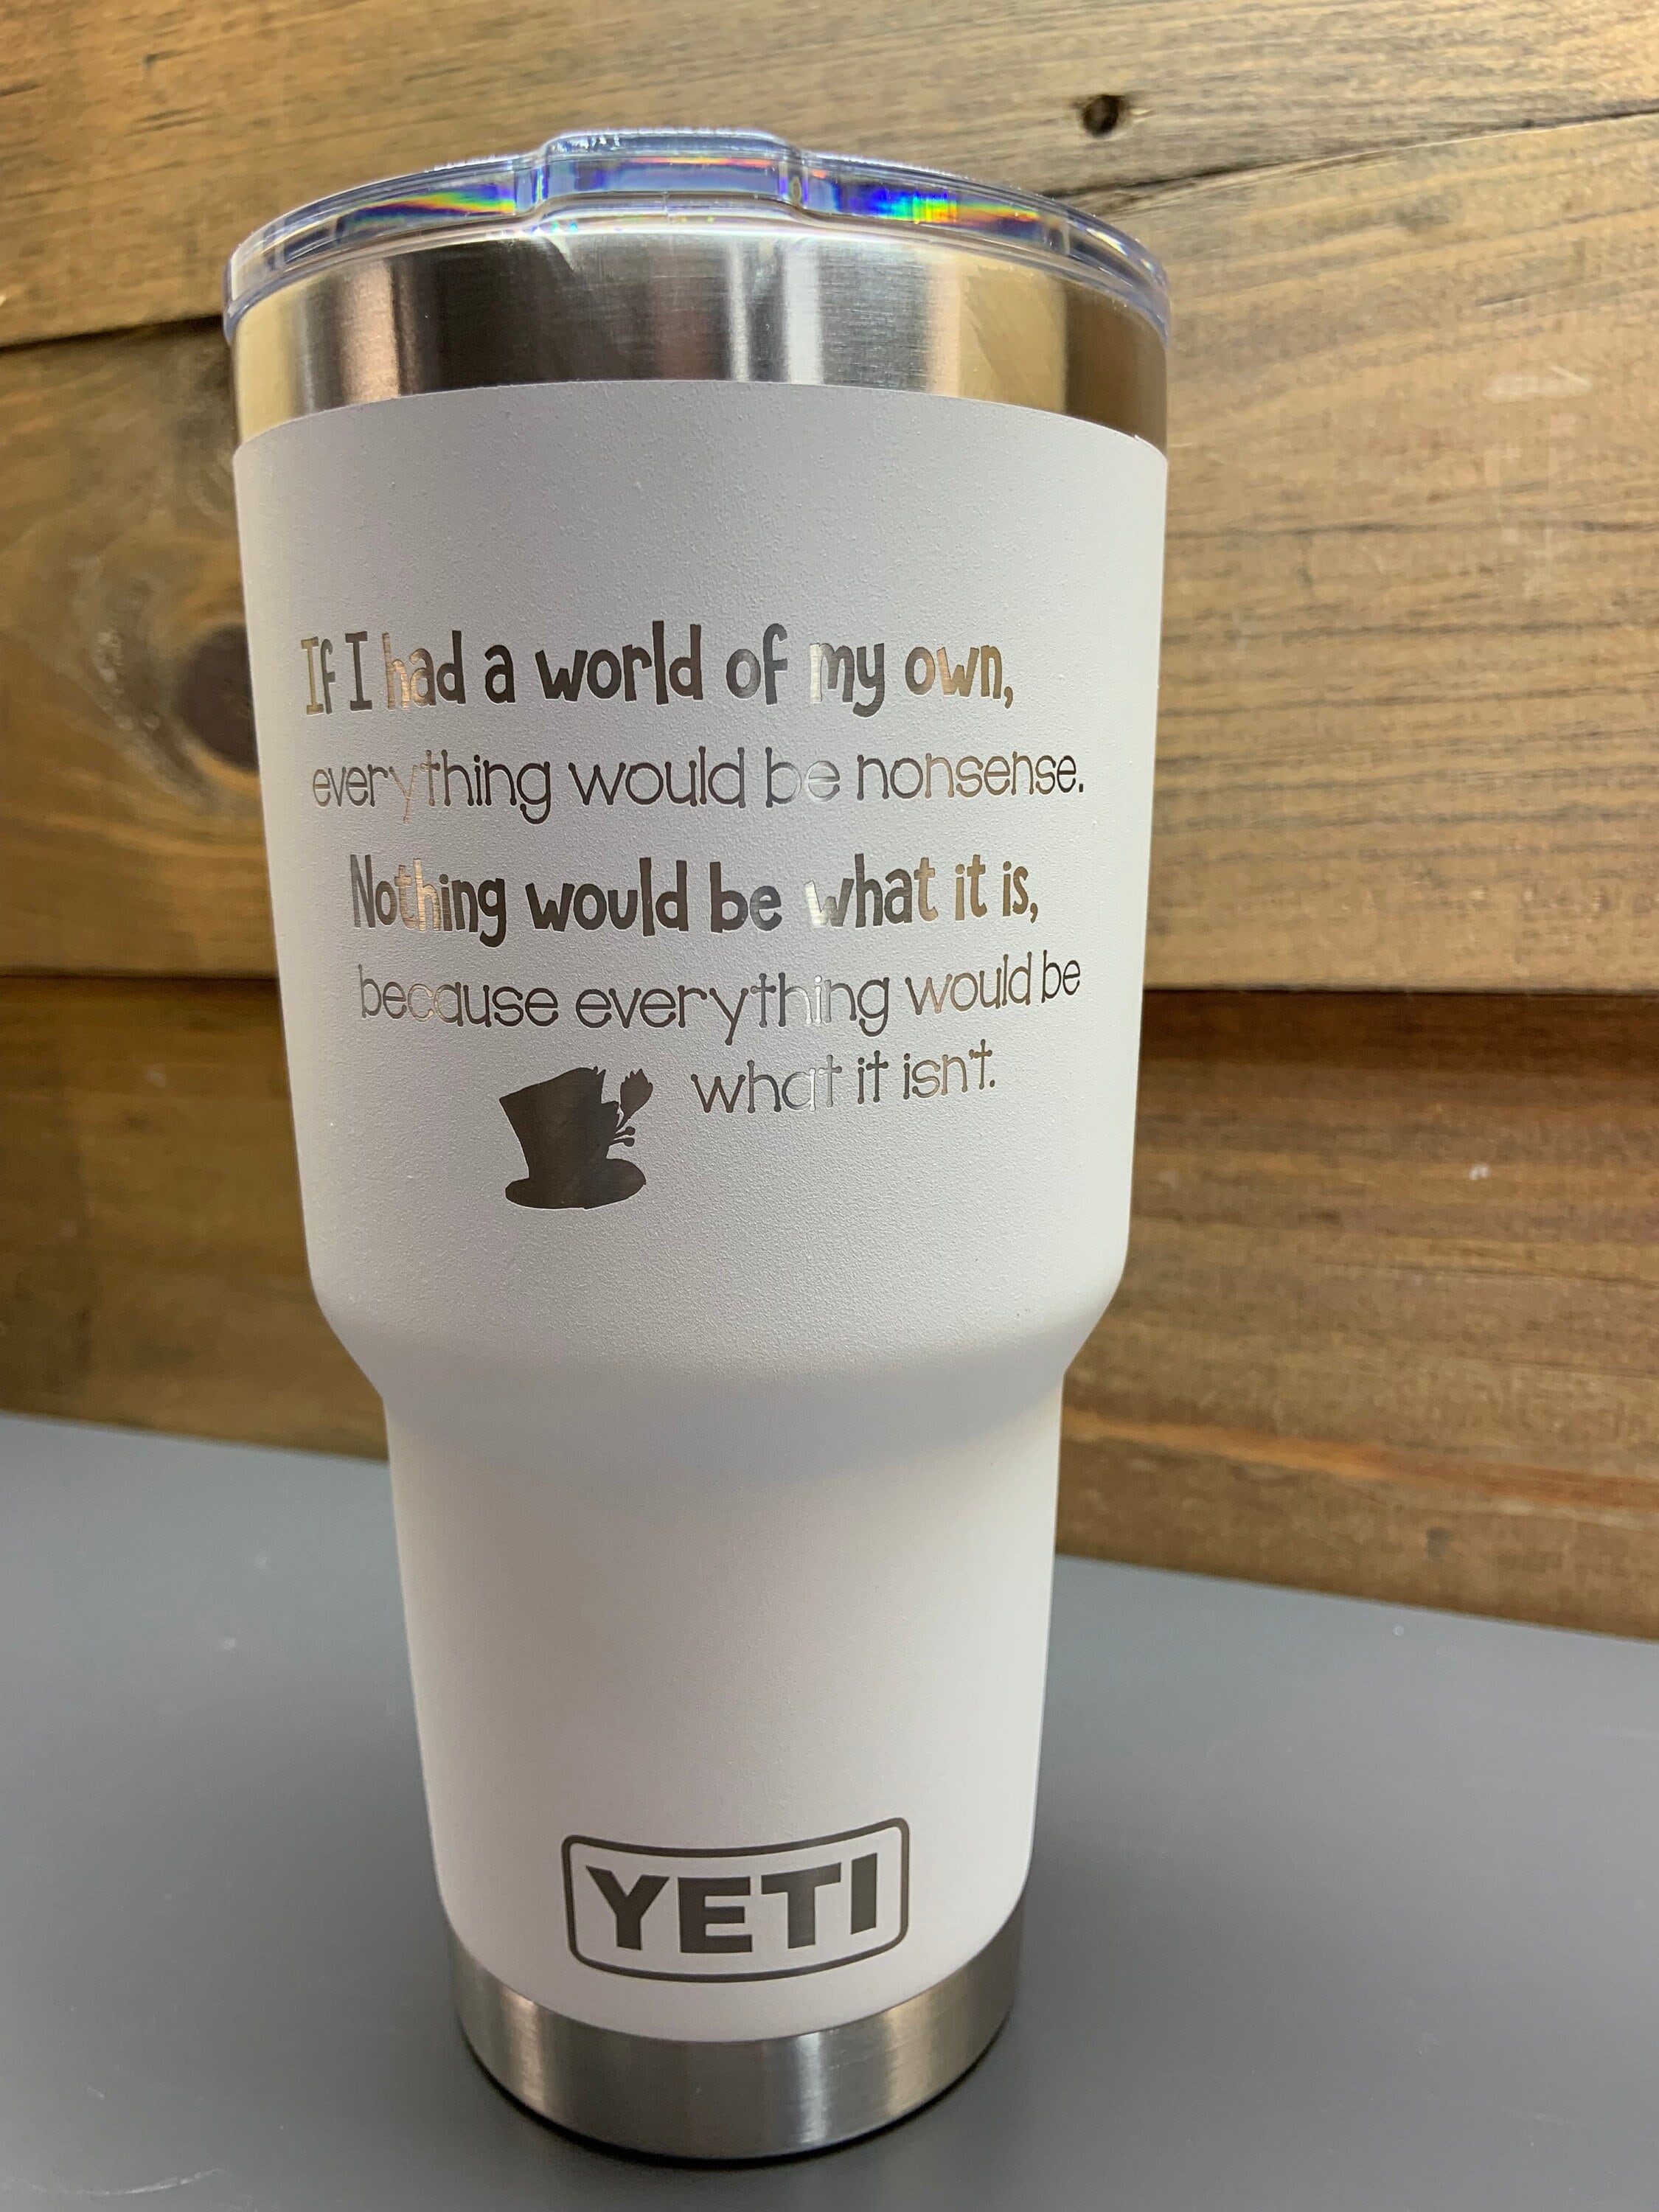 Yeti Is Letting You Customize Its Popular Drinkware for Free for a